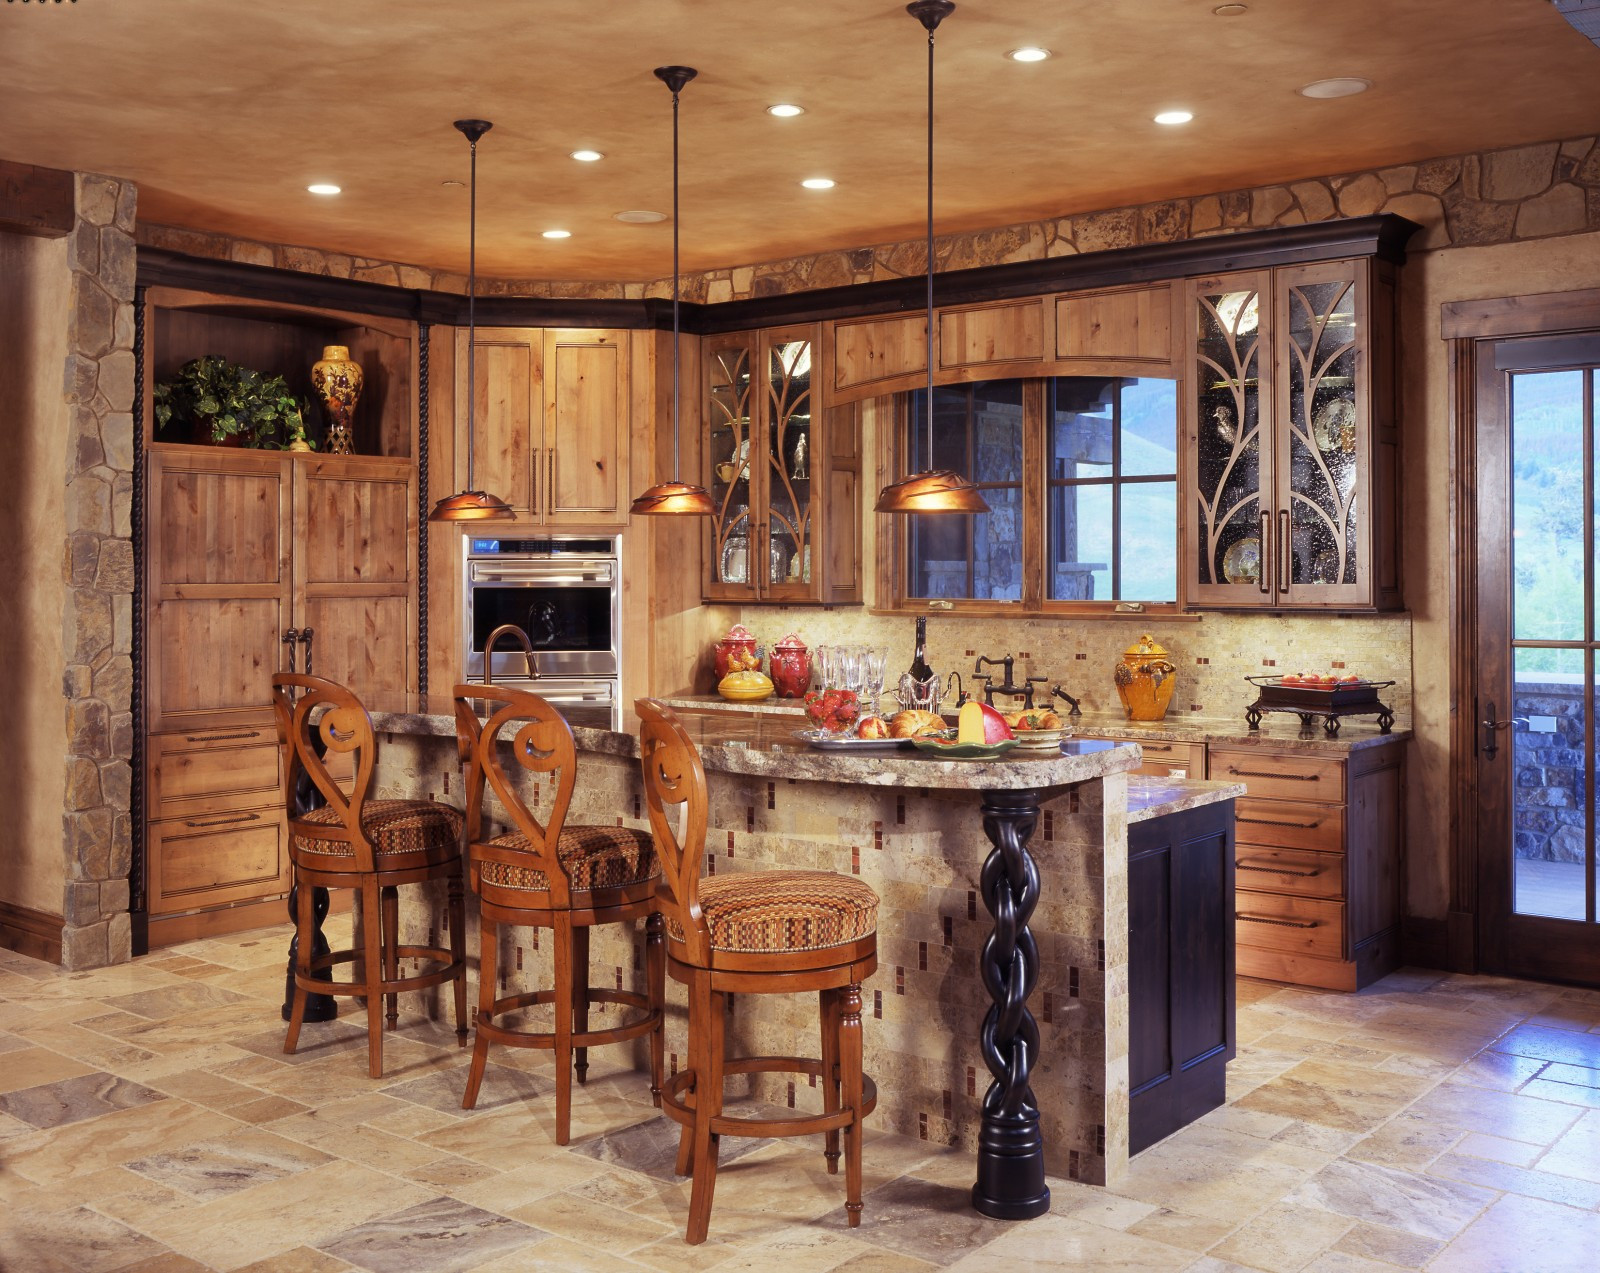 Rustic Kitchen Decor
 Top 25 Ideas to Spruce up the Kitchen Decor in 2014 Qnud